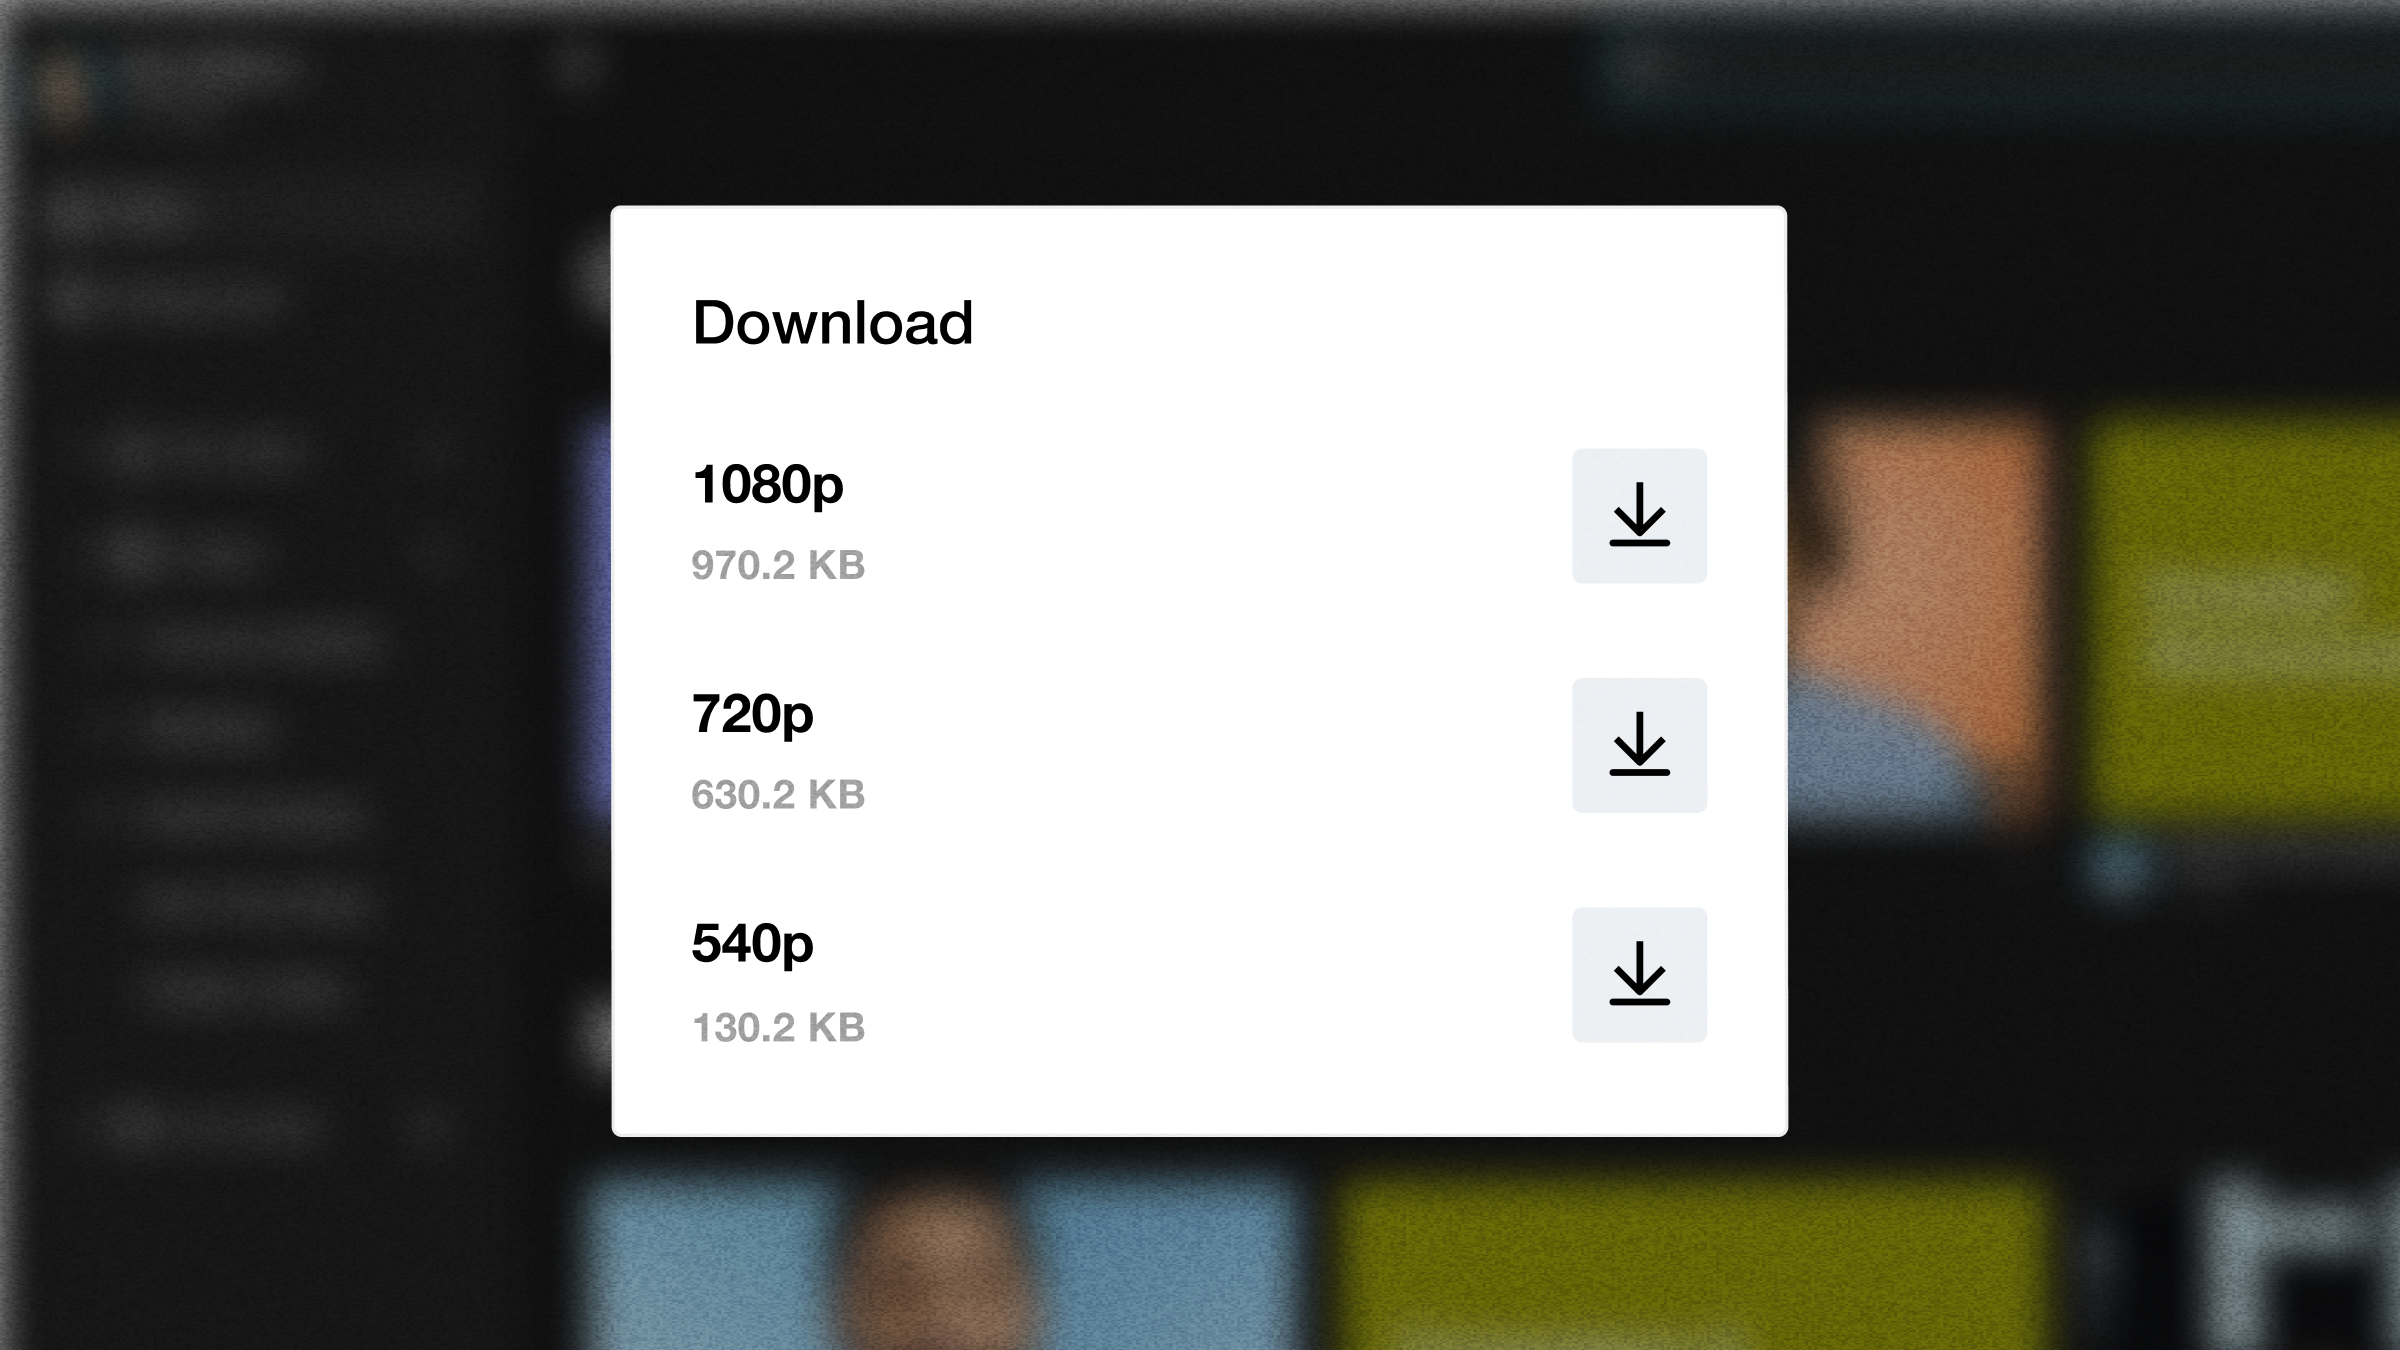 Download Vimeo video high definition formats like 1080p resolution.